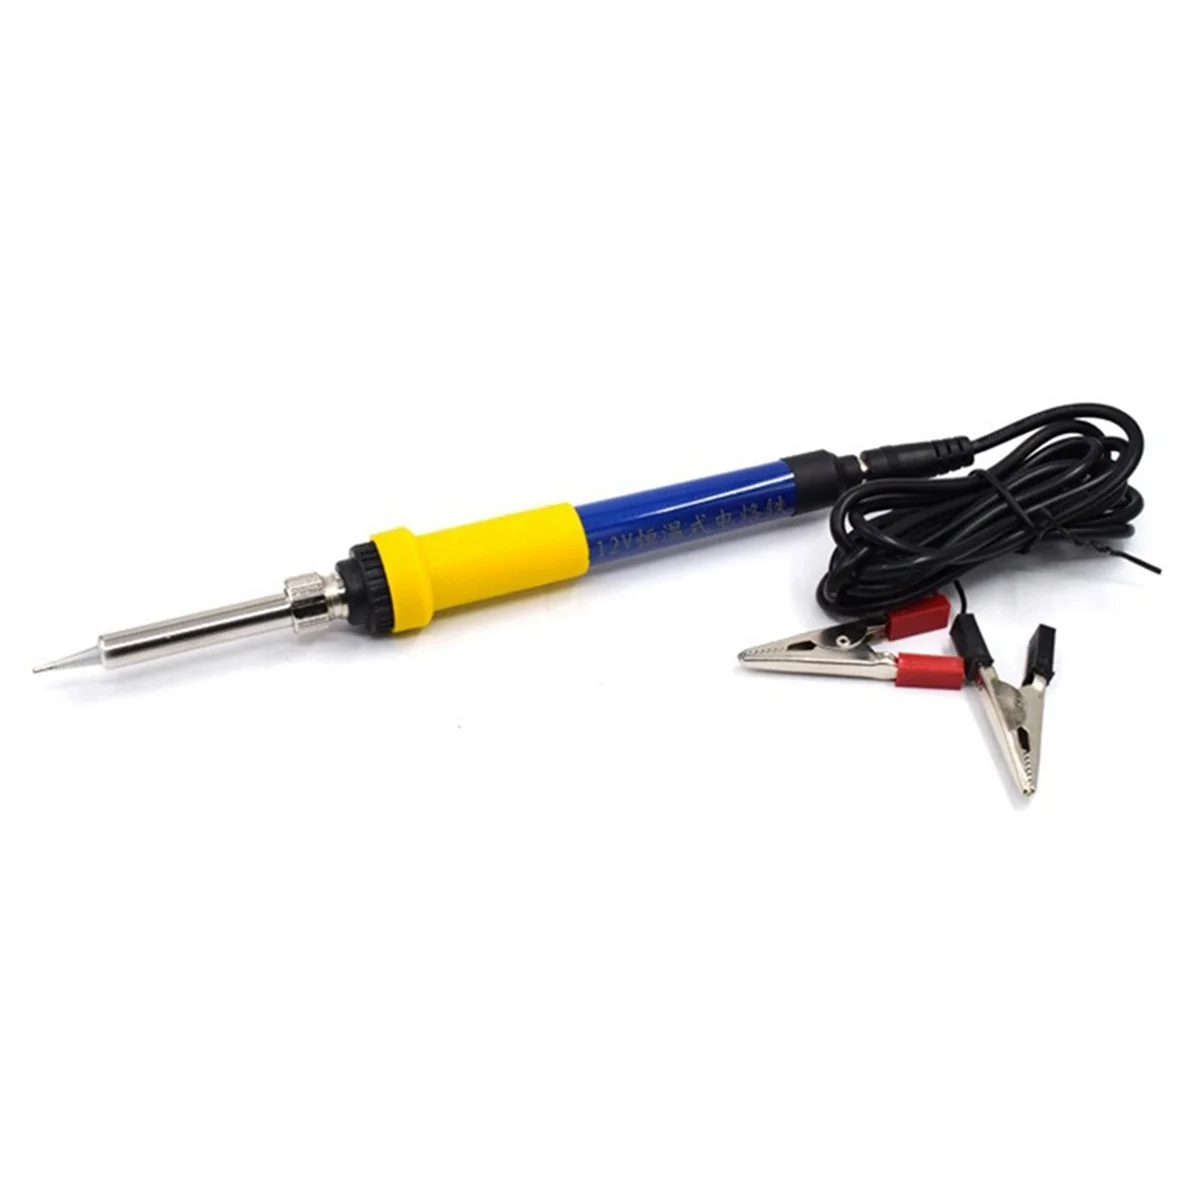 

DC 12V Portable Soldering Iron Low-Voltage Car Battery 60W Welding Rework Repair Tools with Aligator Cilp